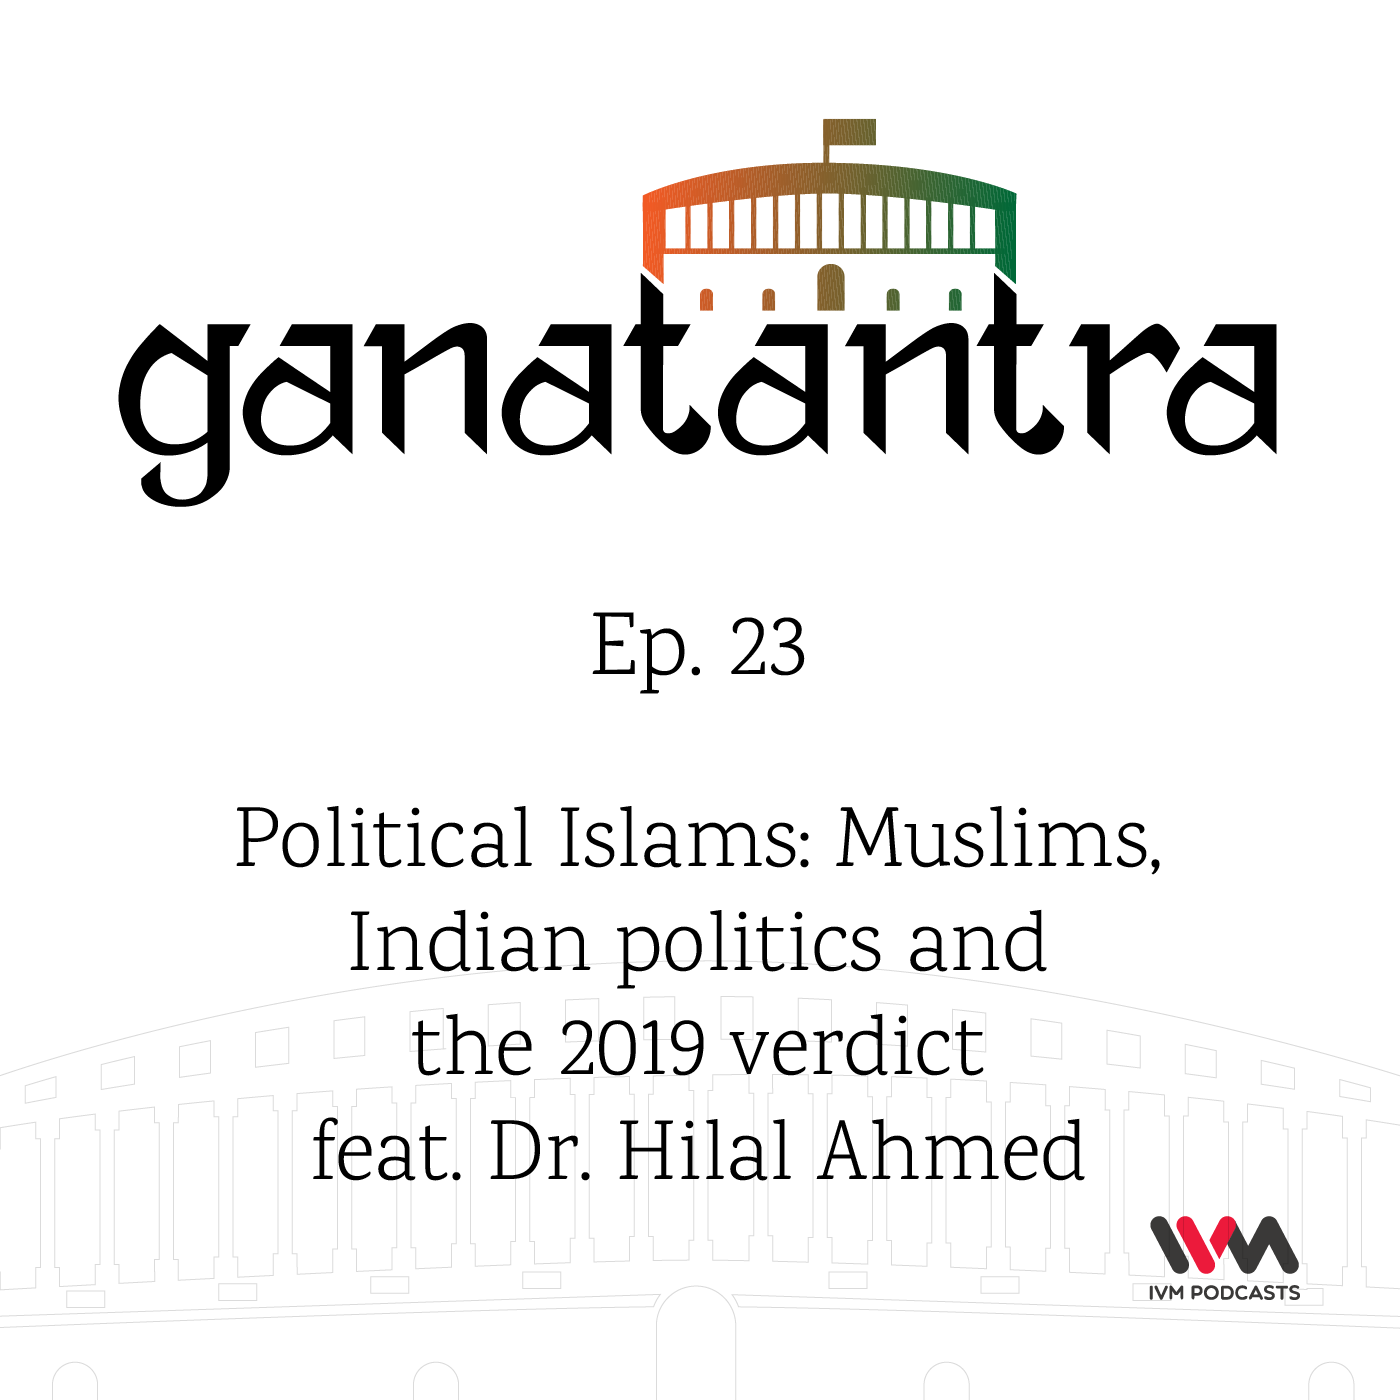 Ep. 23: Political Islams: Muslims, Indian politics and the 2019 verdict feat. Dr. Hilal Ahmed